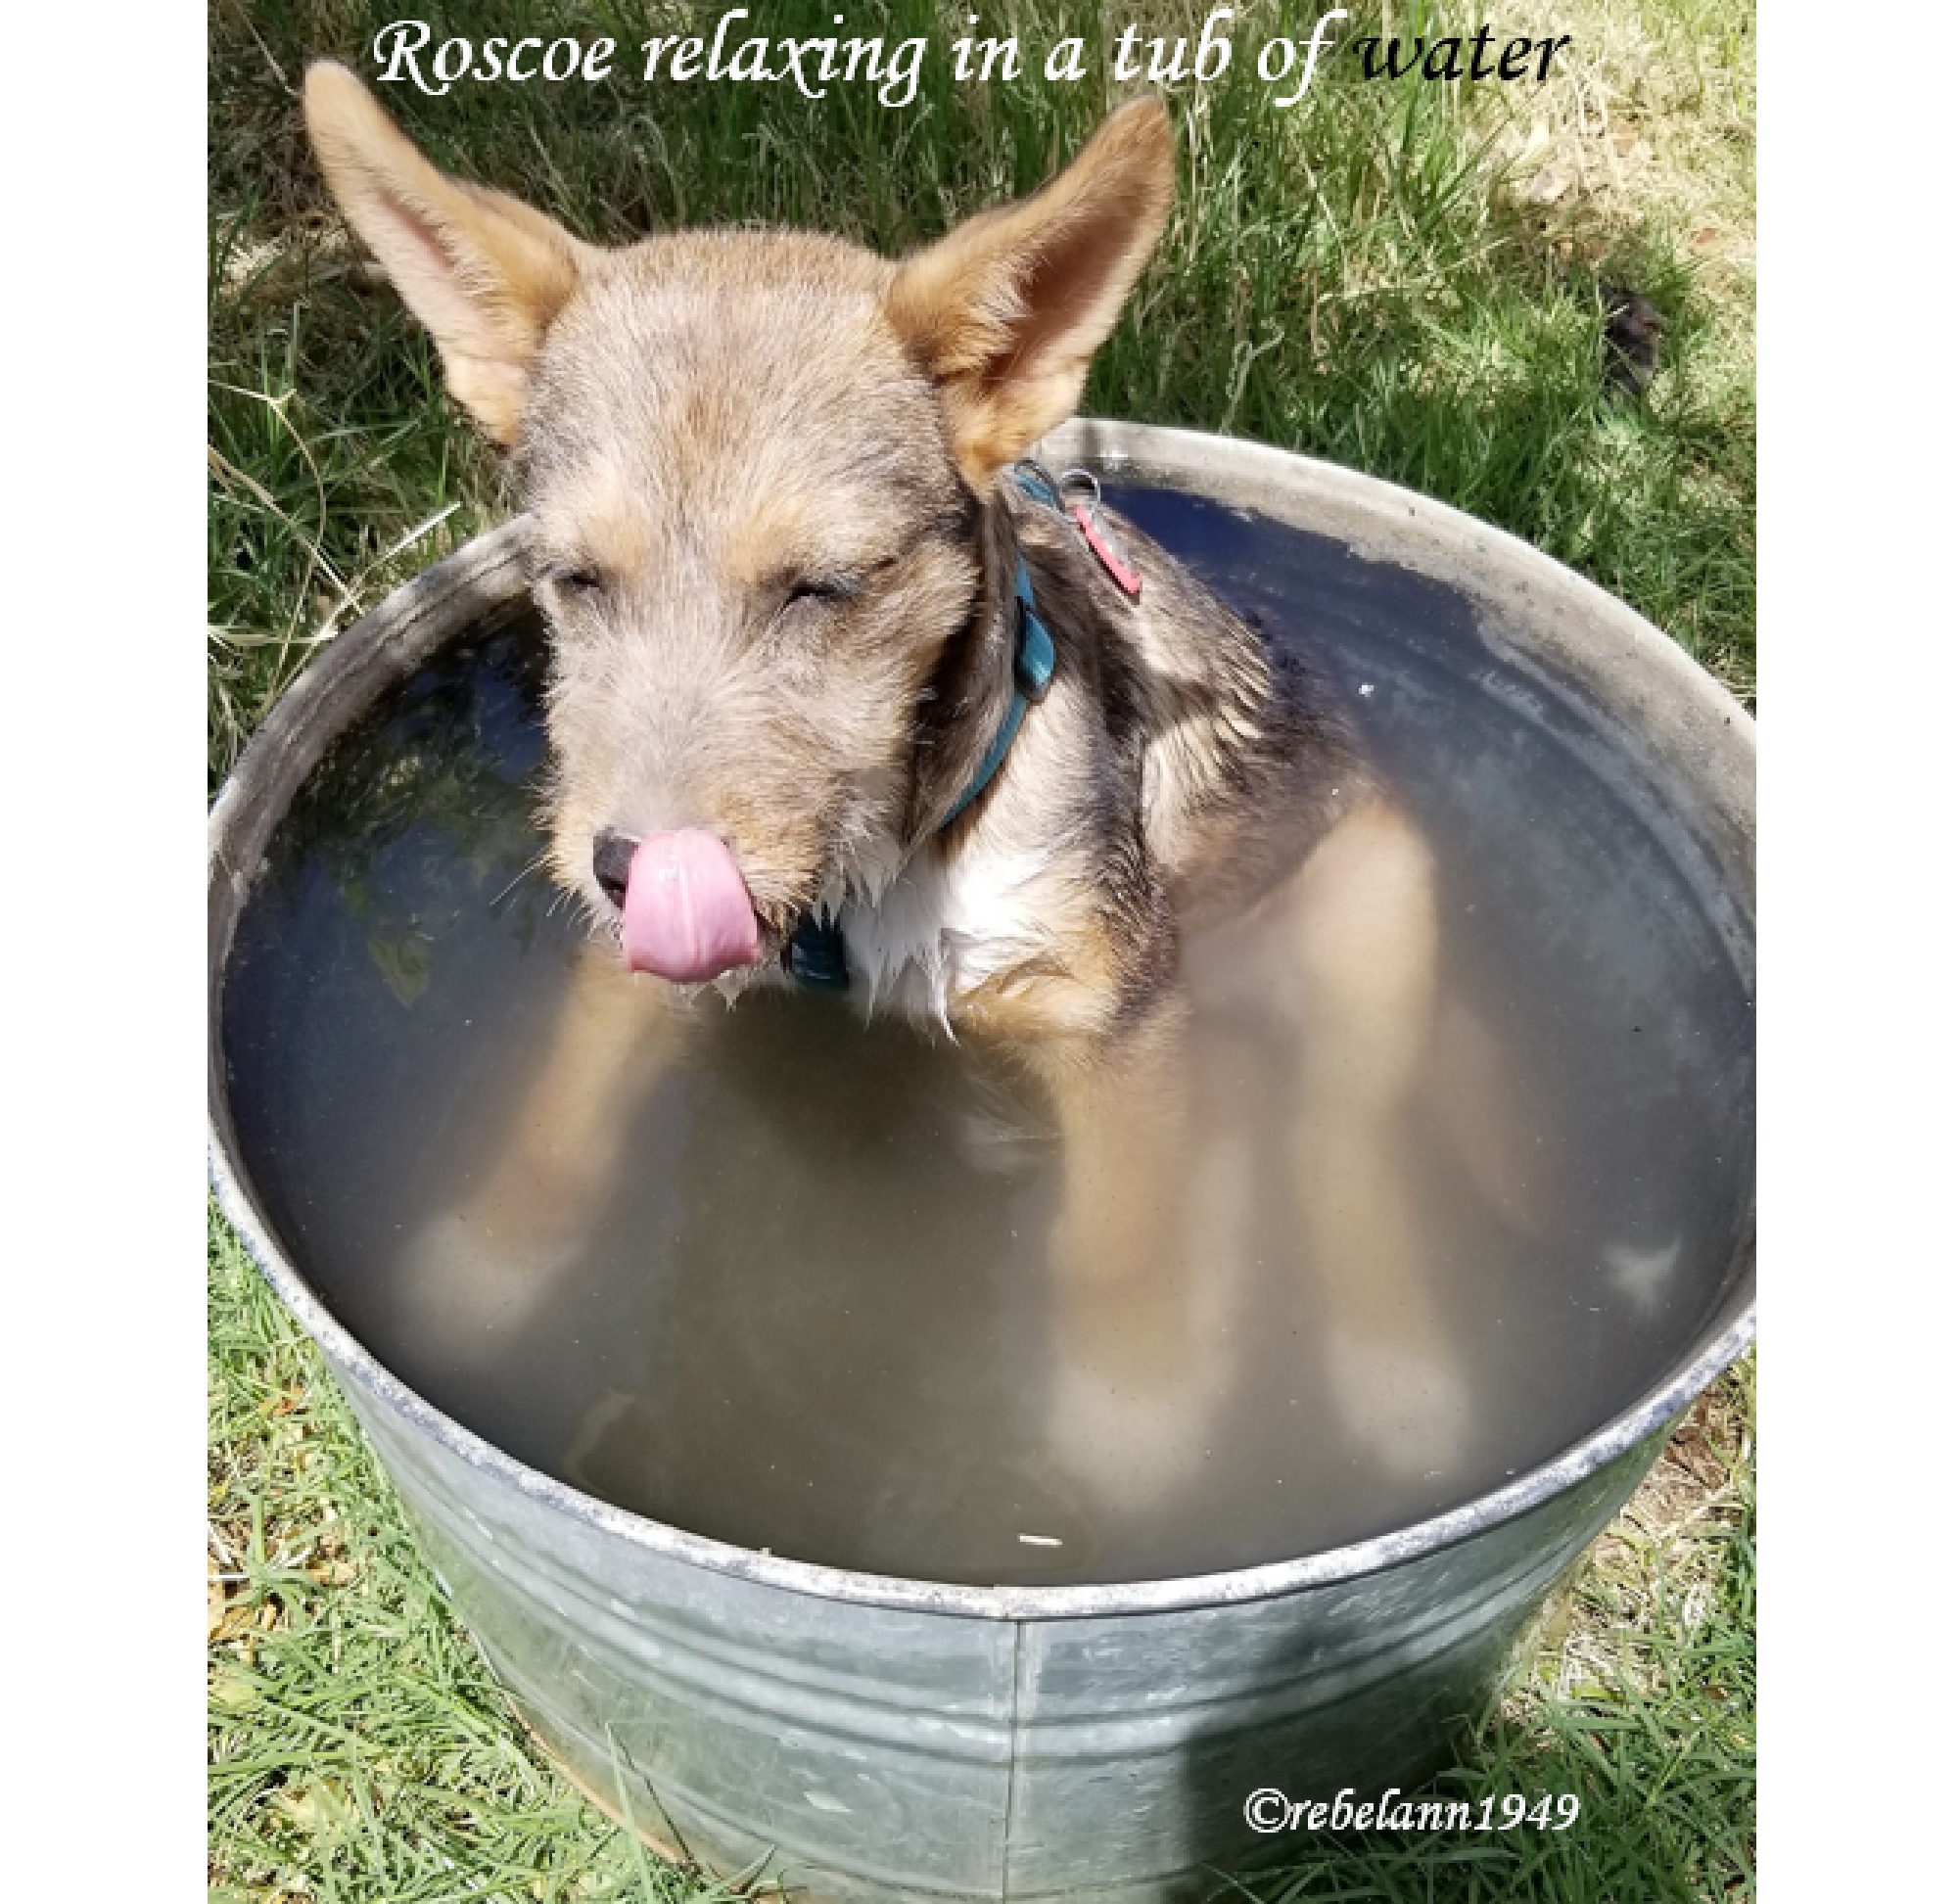 After a romp with the neighbors in dusty hot weather I put him in the tub of water, I think he likes it